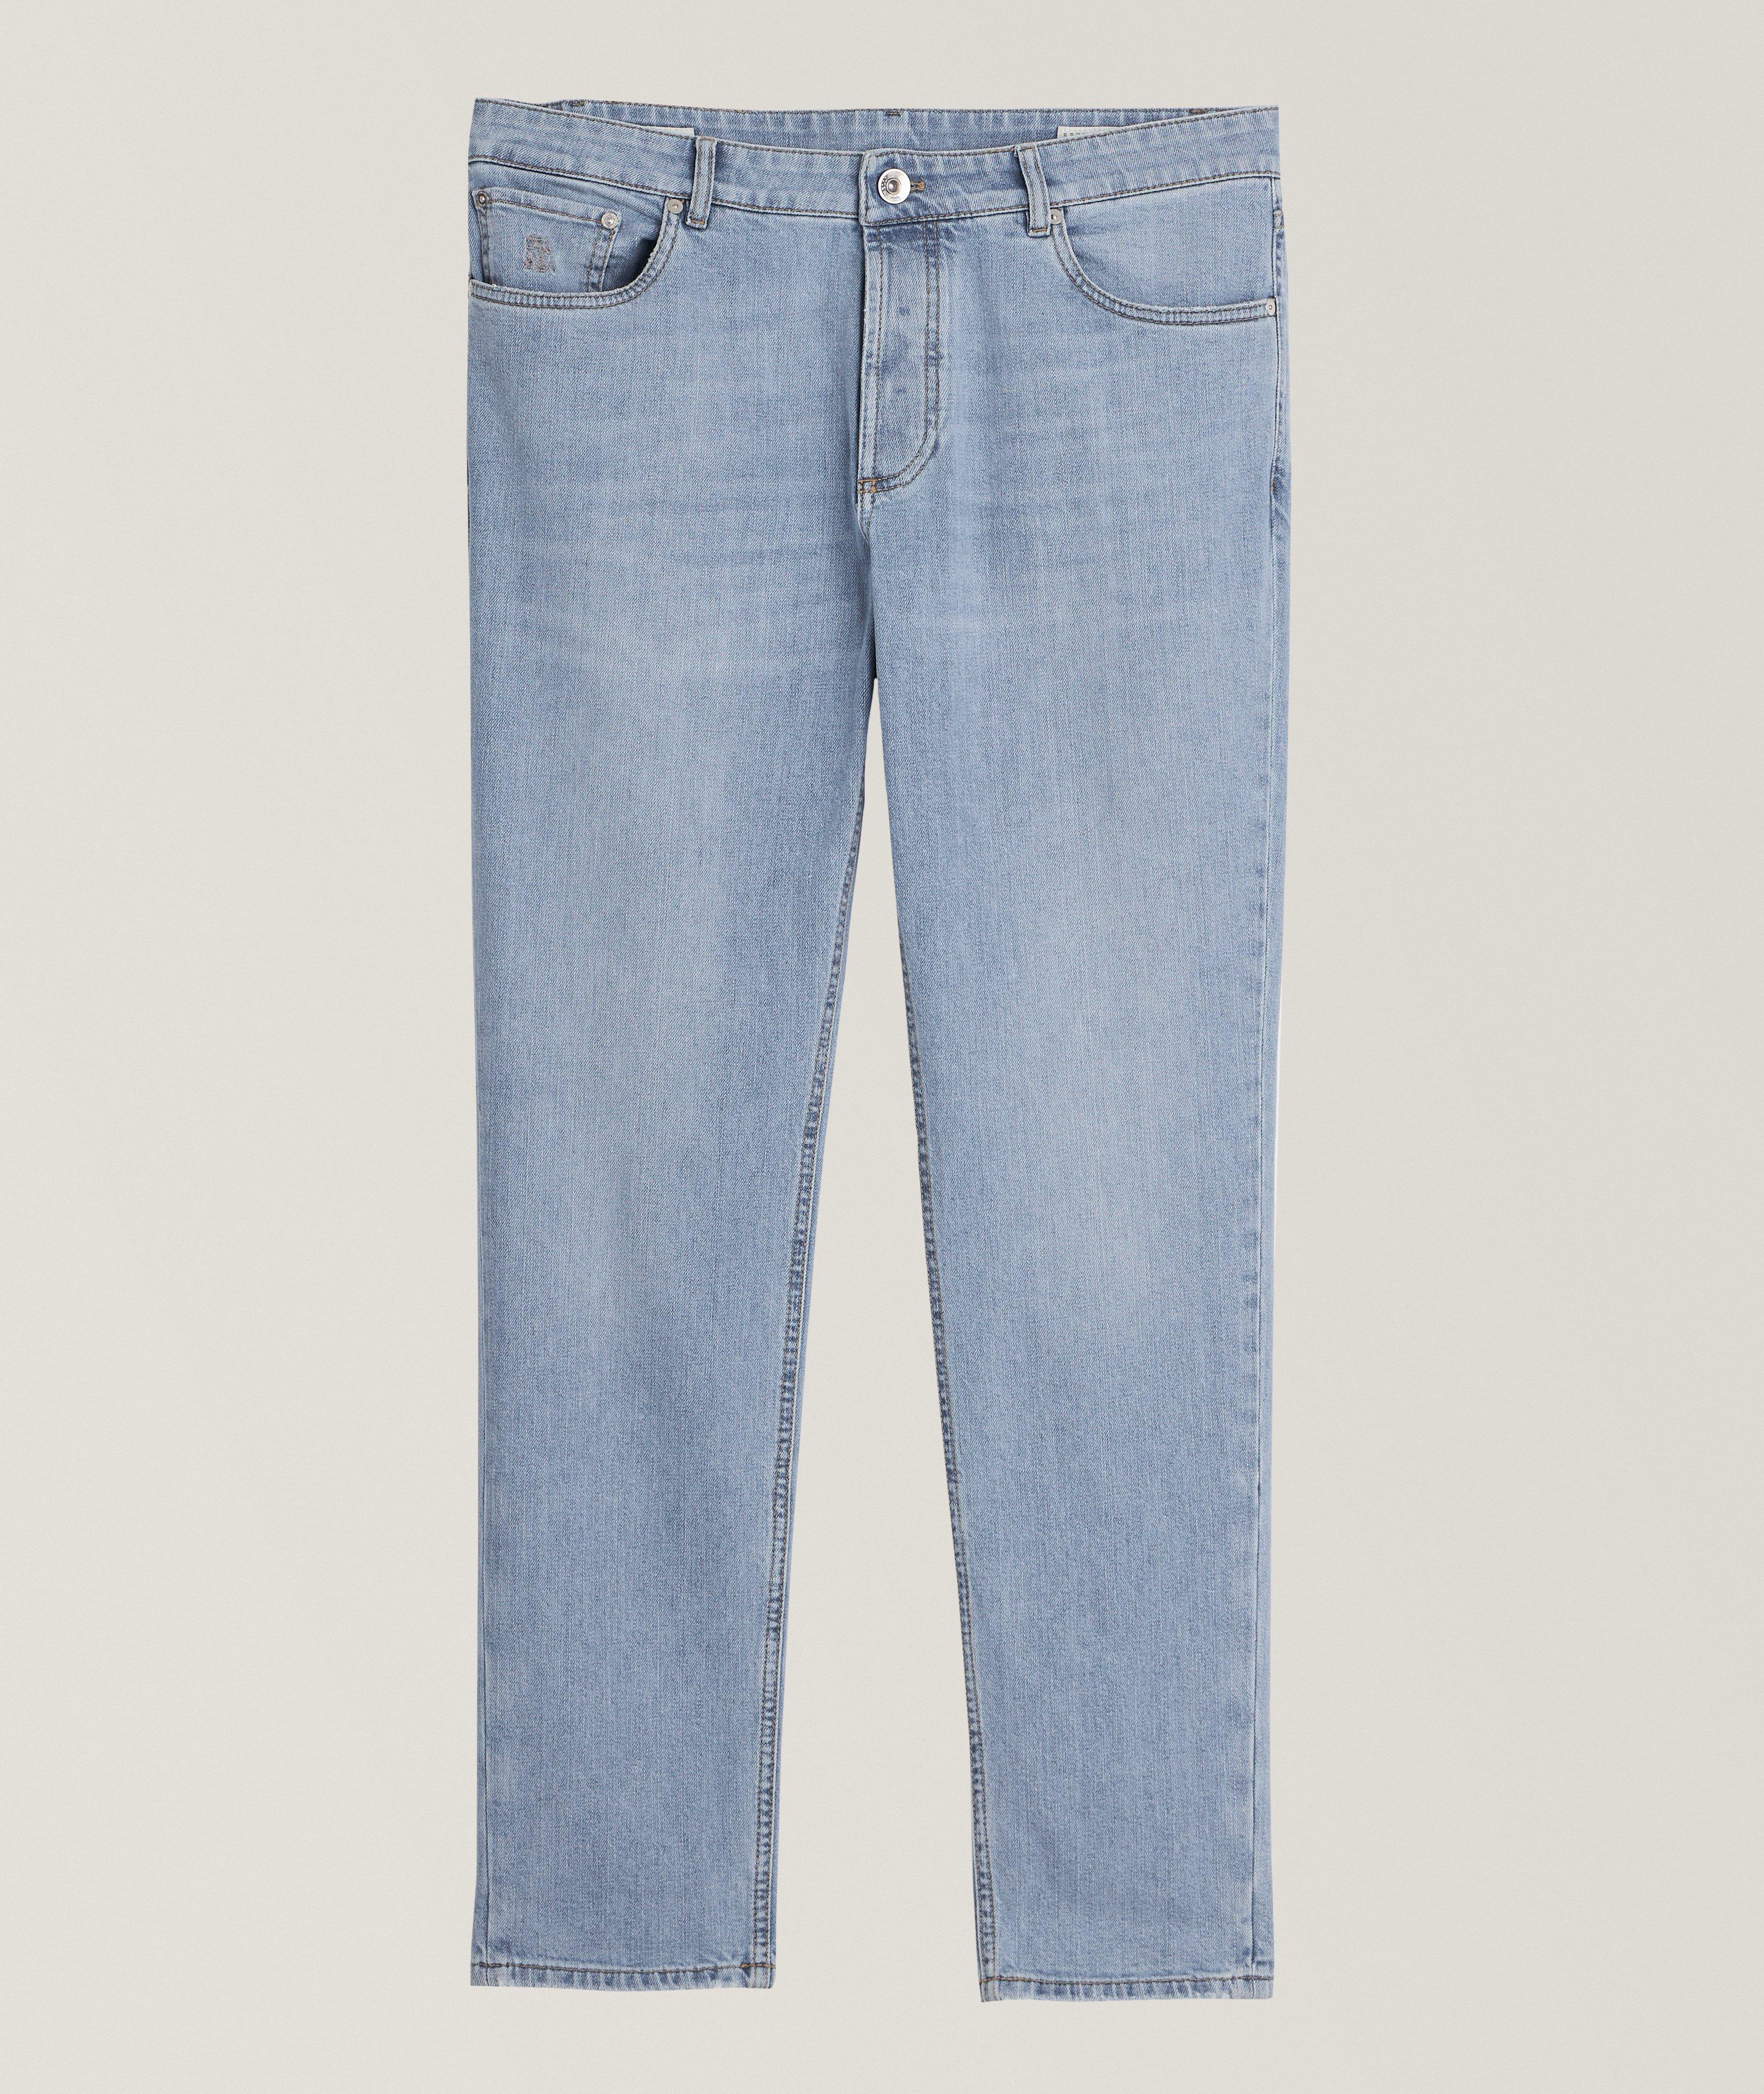 Five-Pocket Stretch-Cotton Traditional Fit Jeans image 0